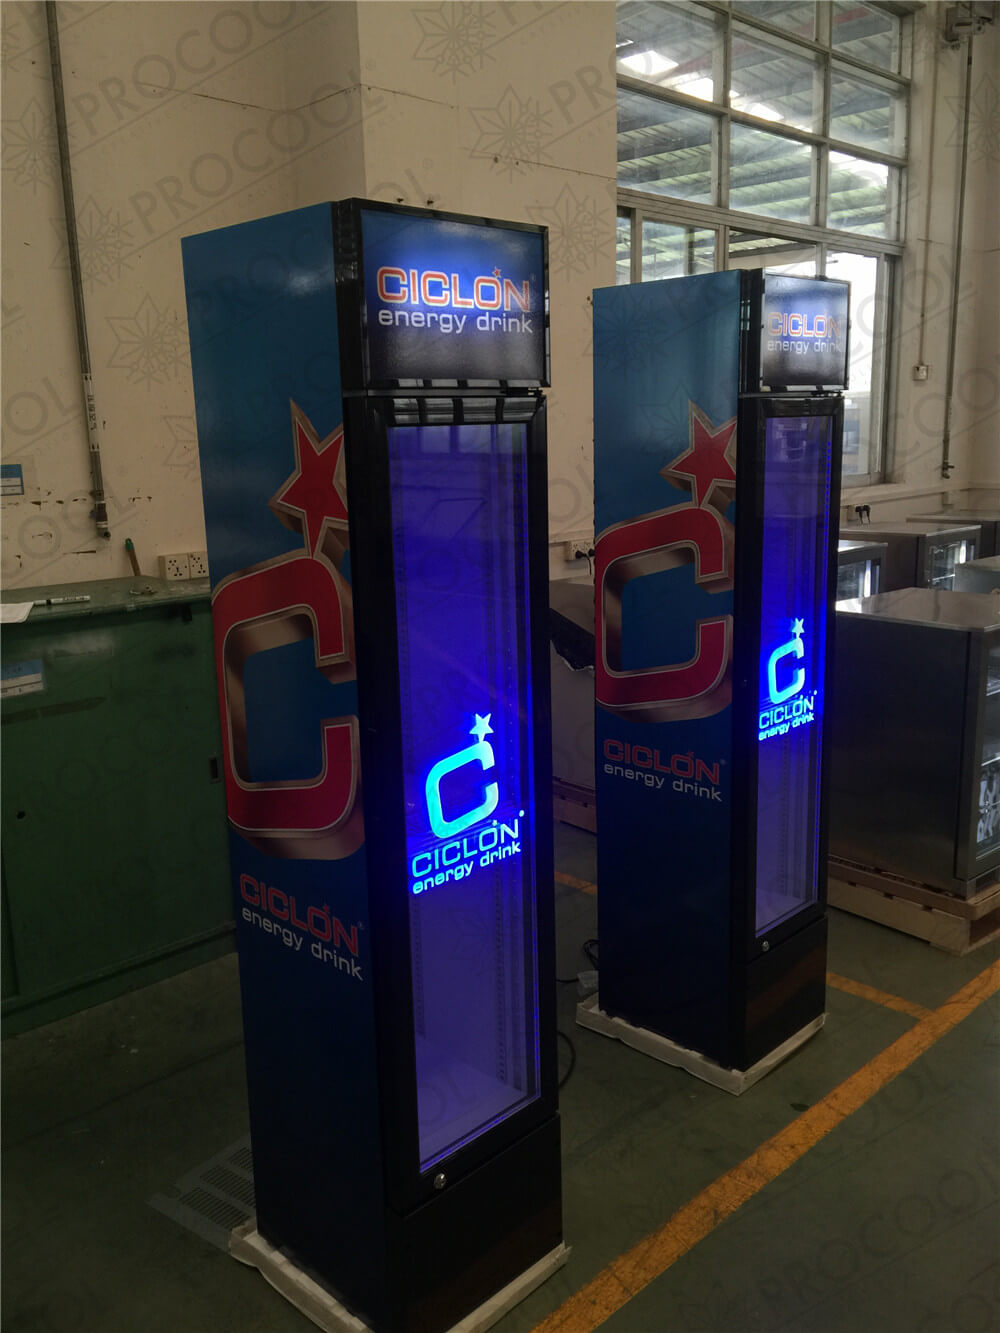 Procool Refrigerators with Illuminated Etched Glass Signs